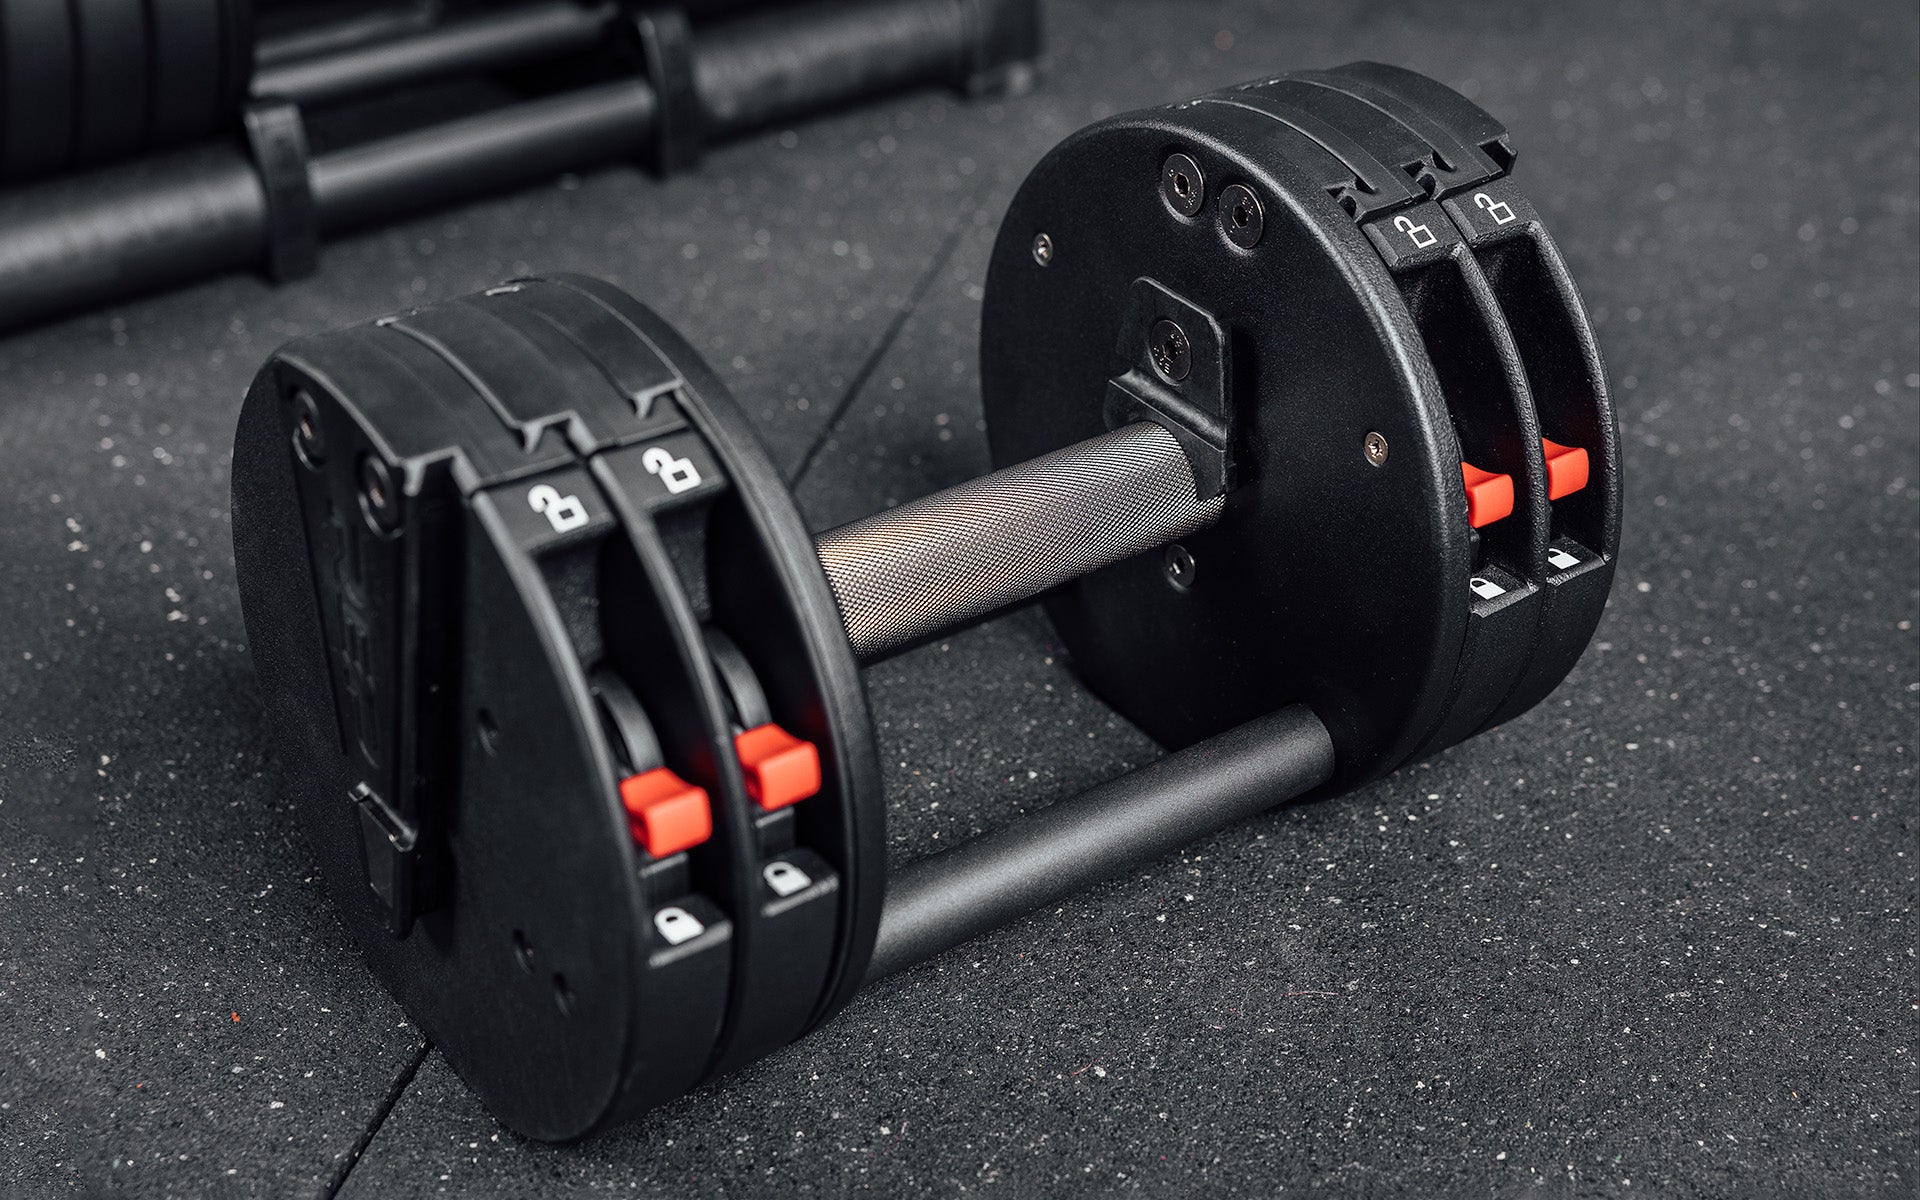 Close-up view of a single REP Fitness QuickDraw Adjustable Dumbbell out of it's cradle.